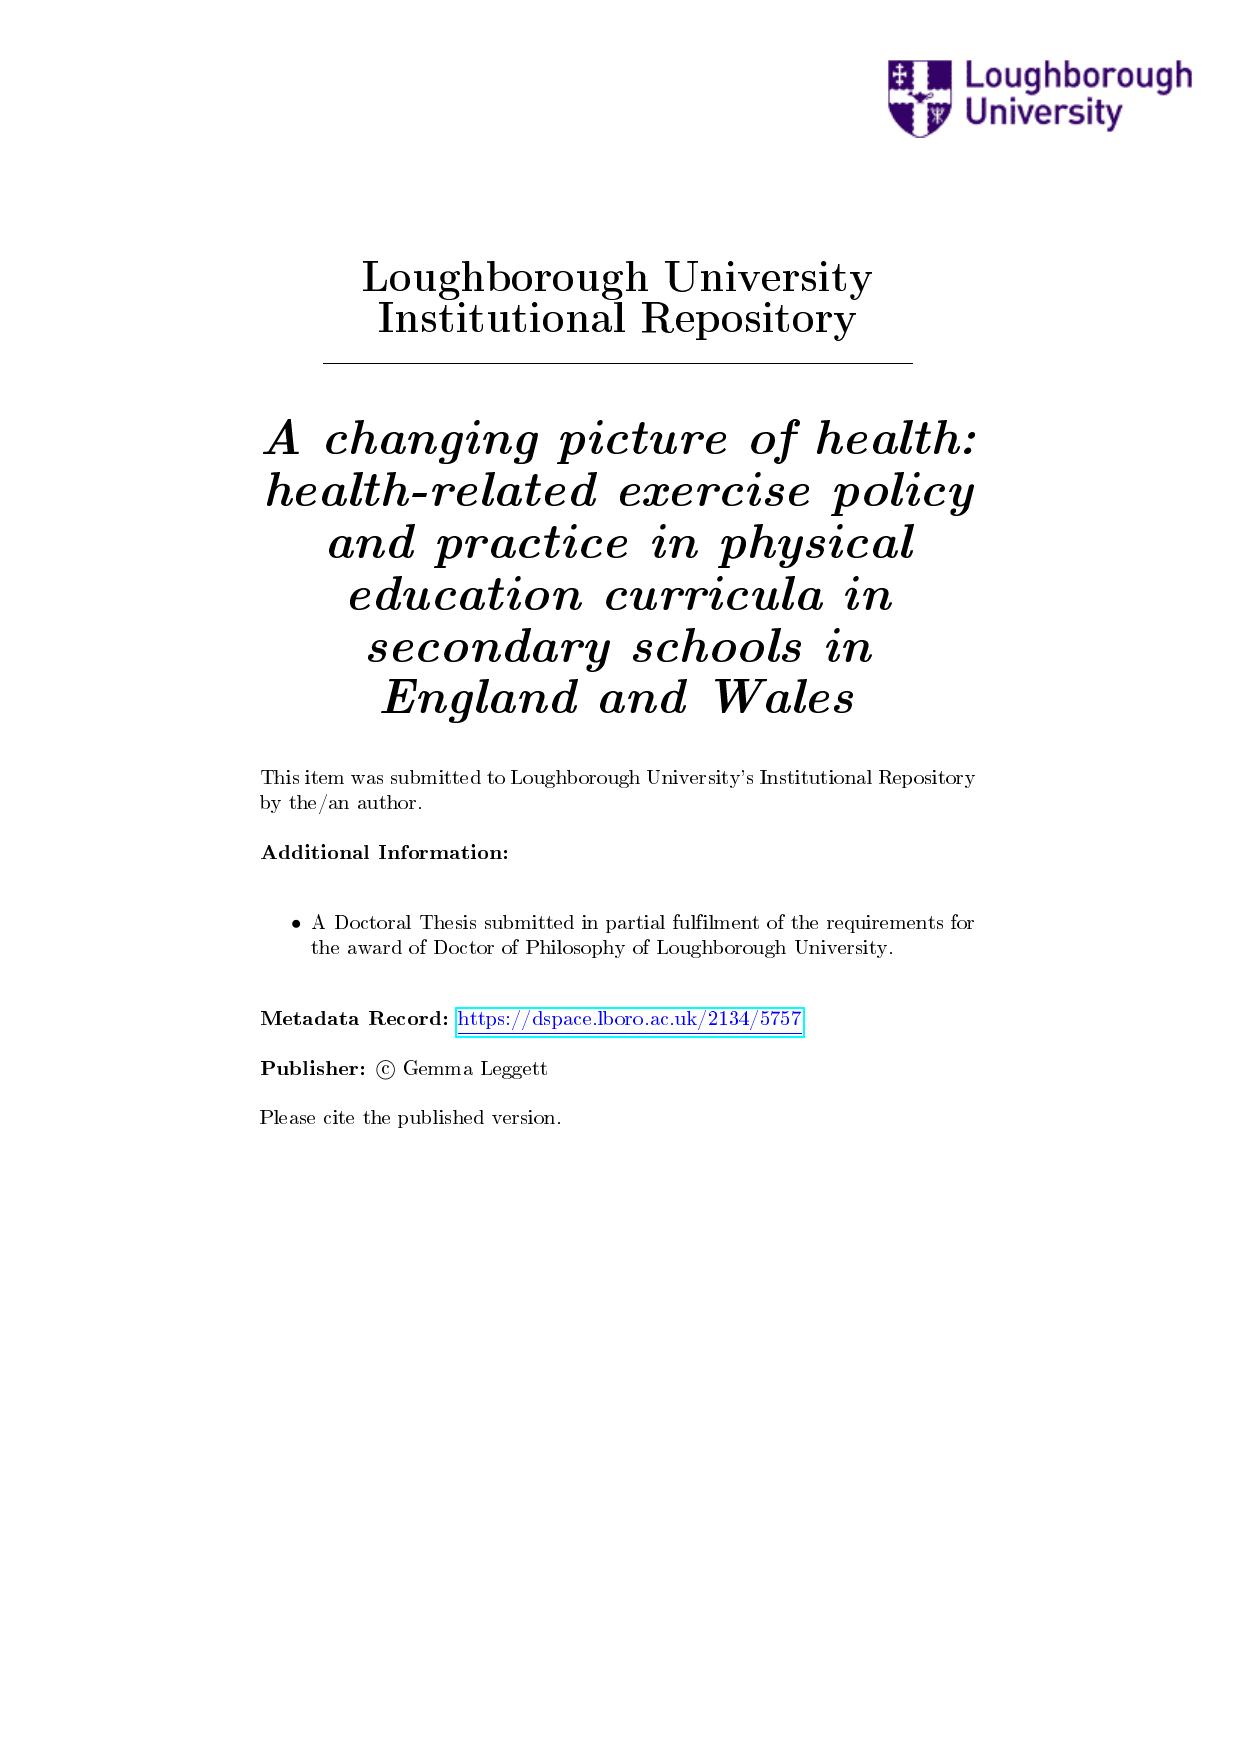 health-related exercise policy and practice in physical education curricula in secondary schools in England and Wales 2008